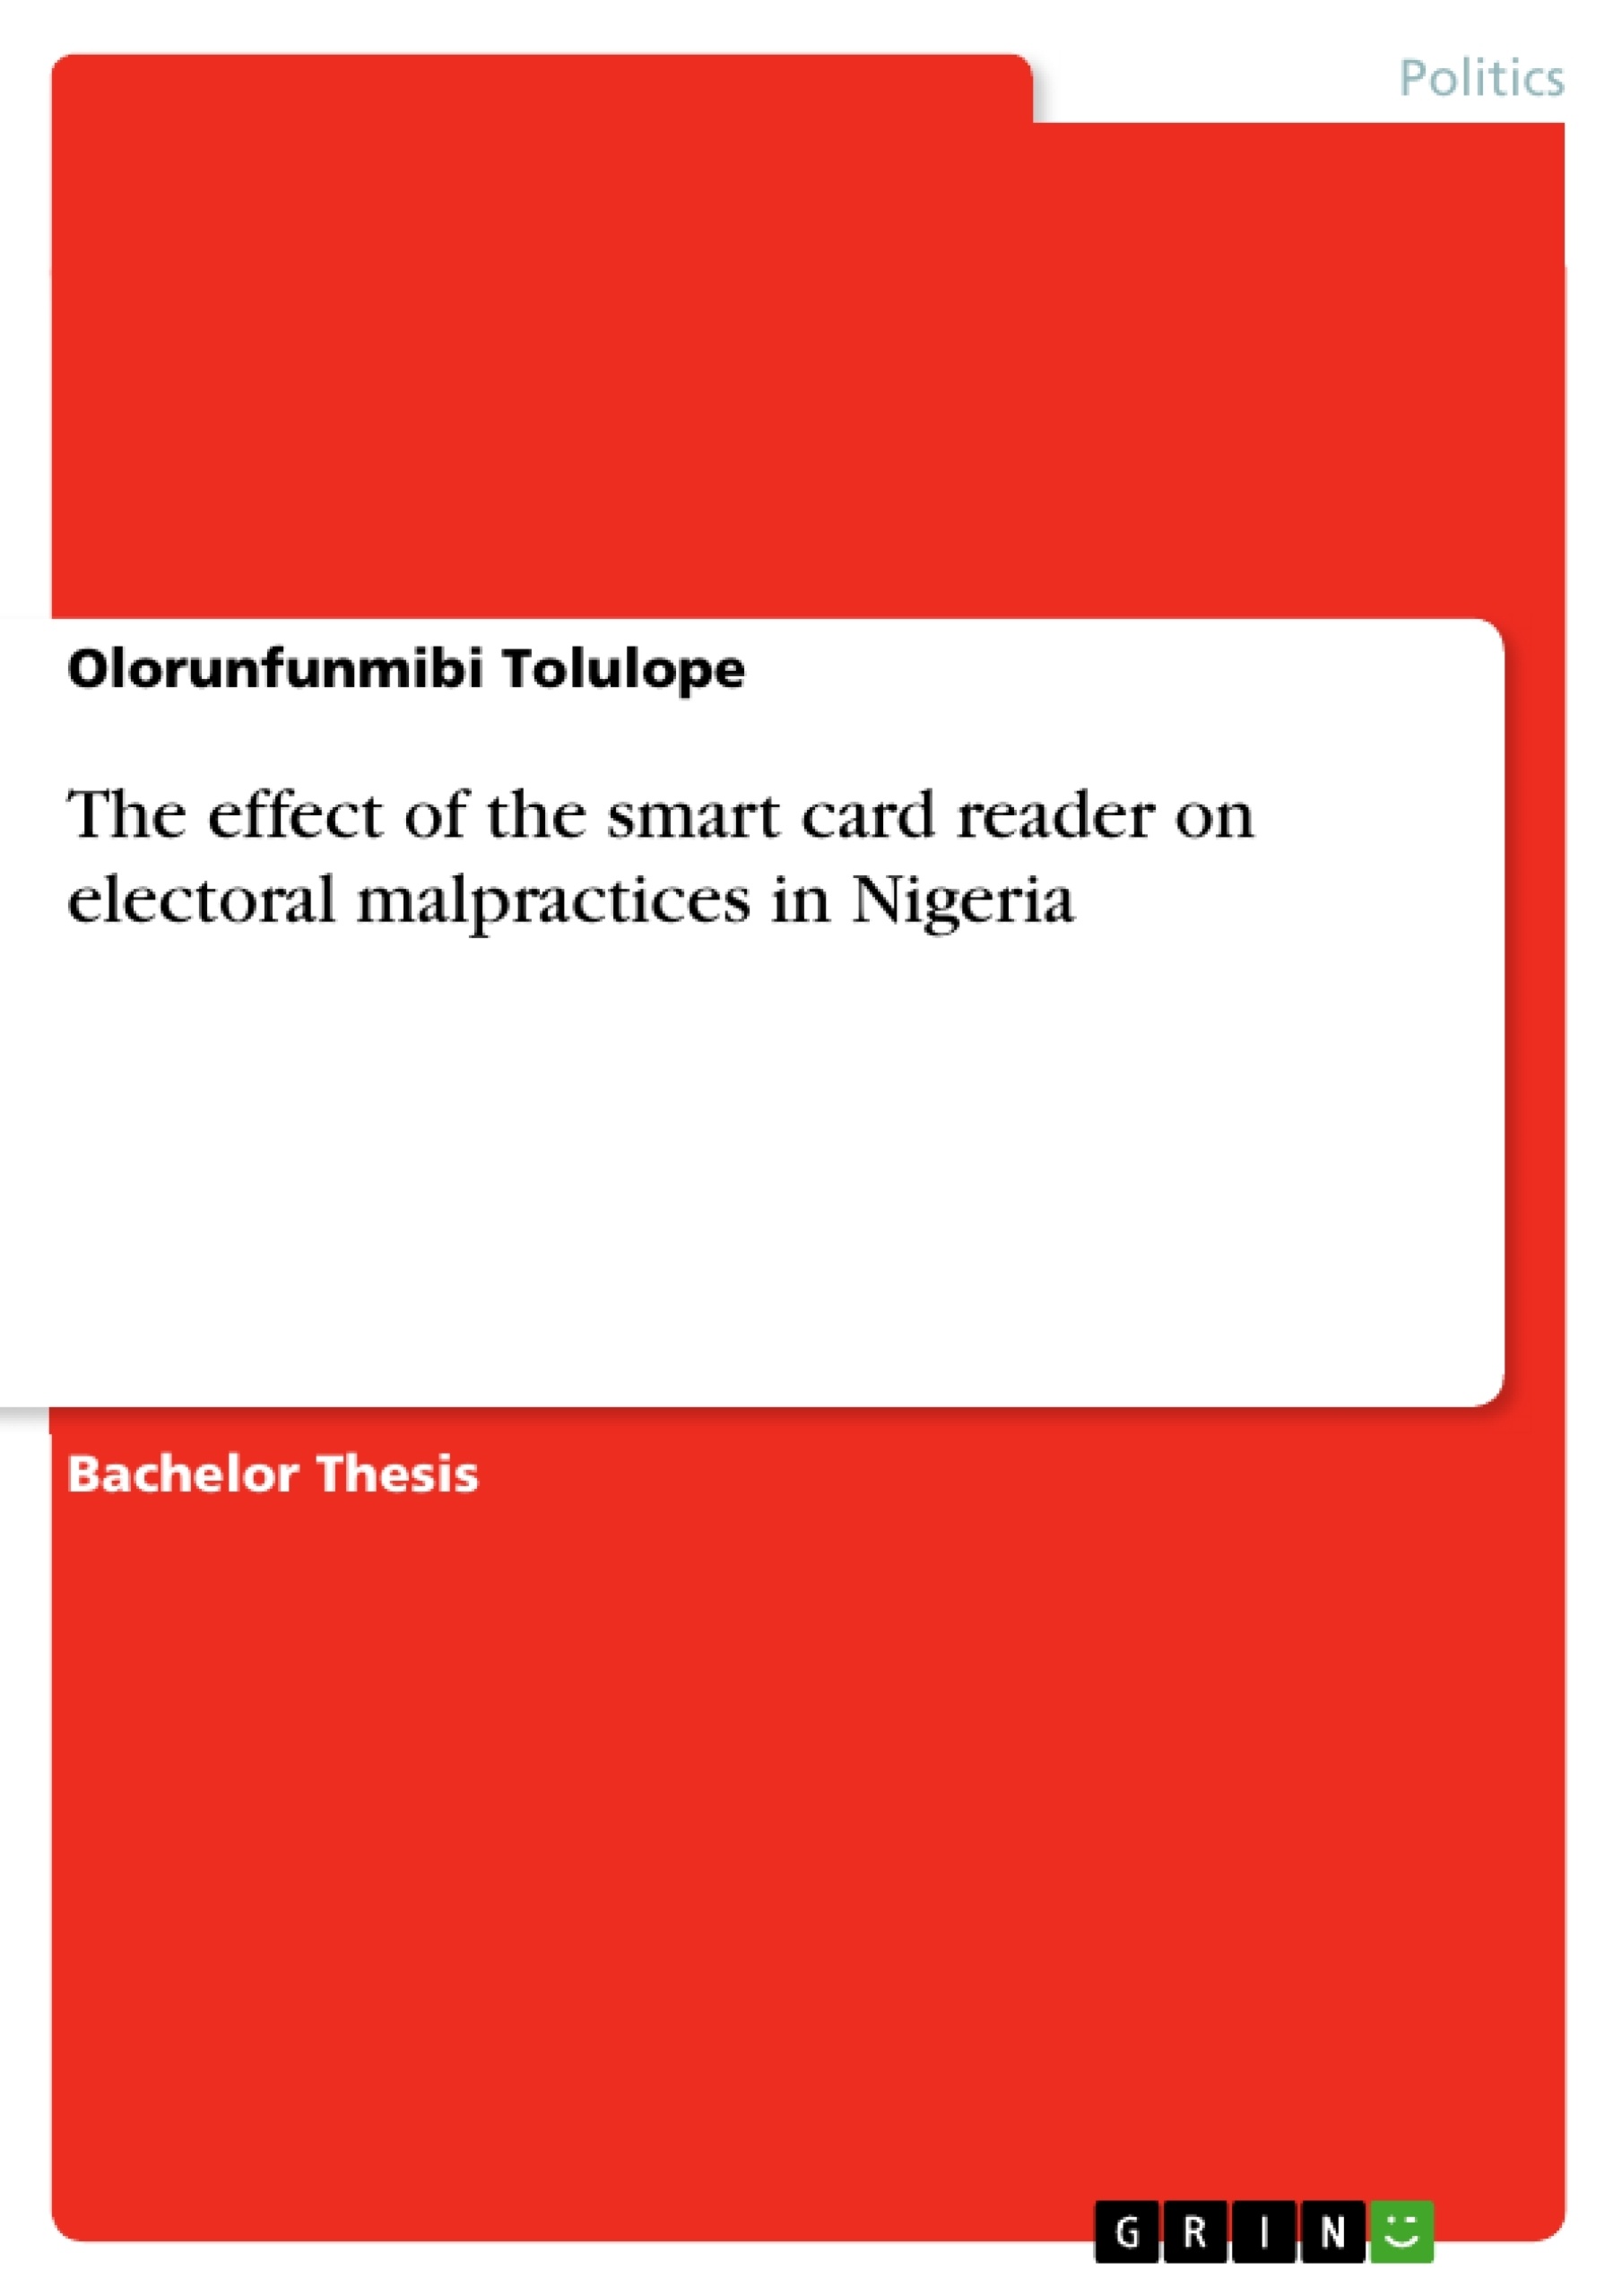 Title: The effect of the smart card reader on electoral malpractices in Nigeria